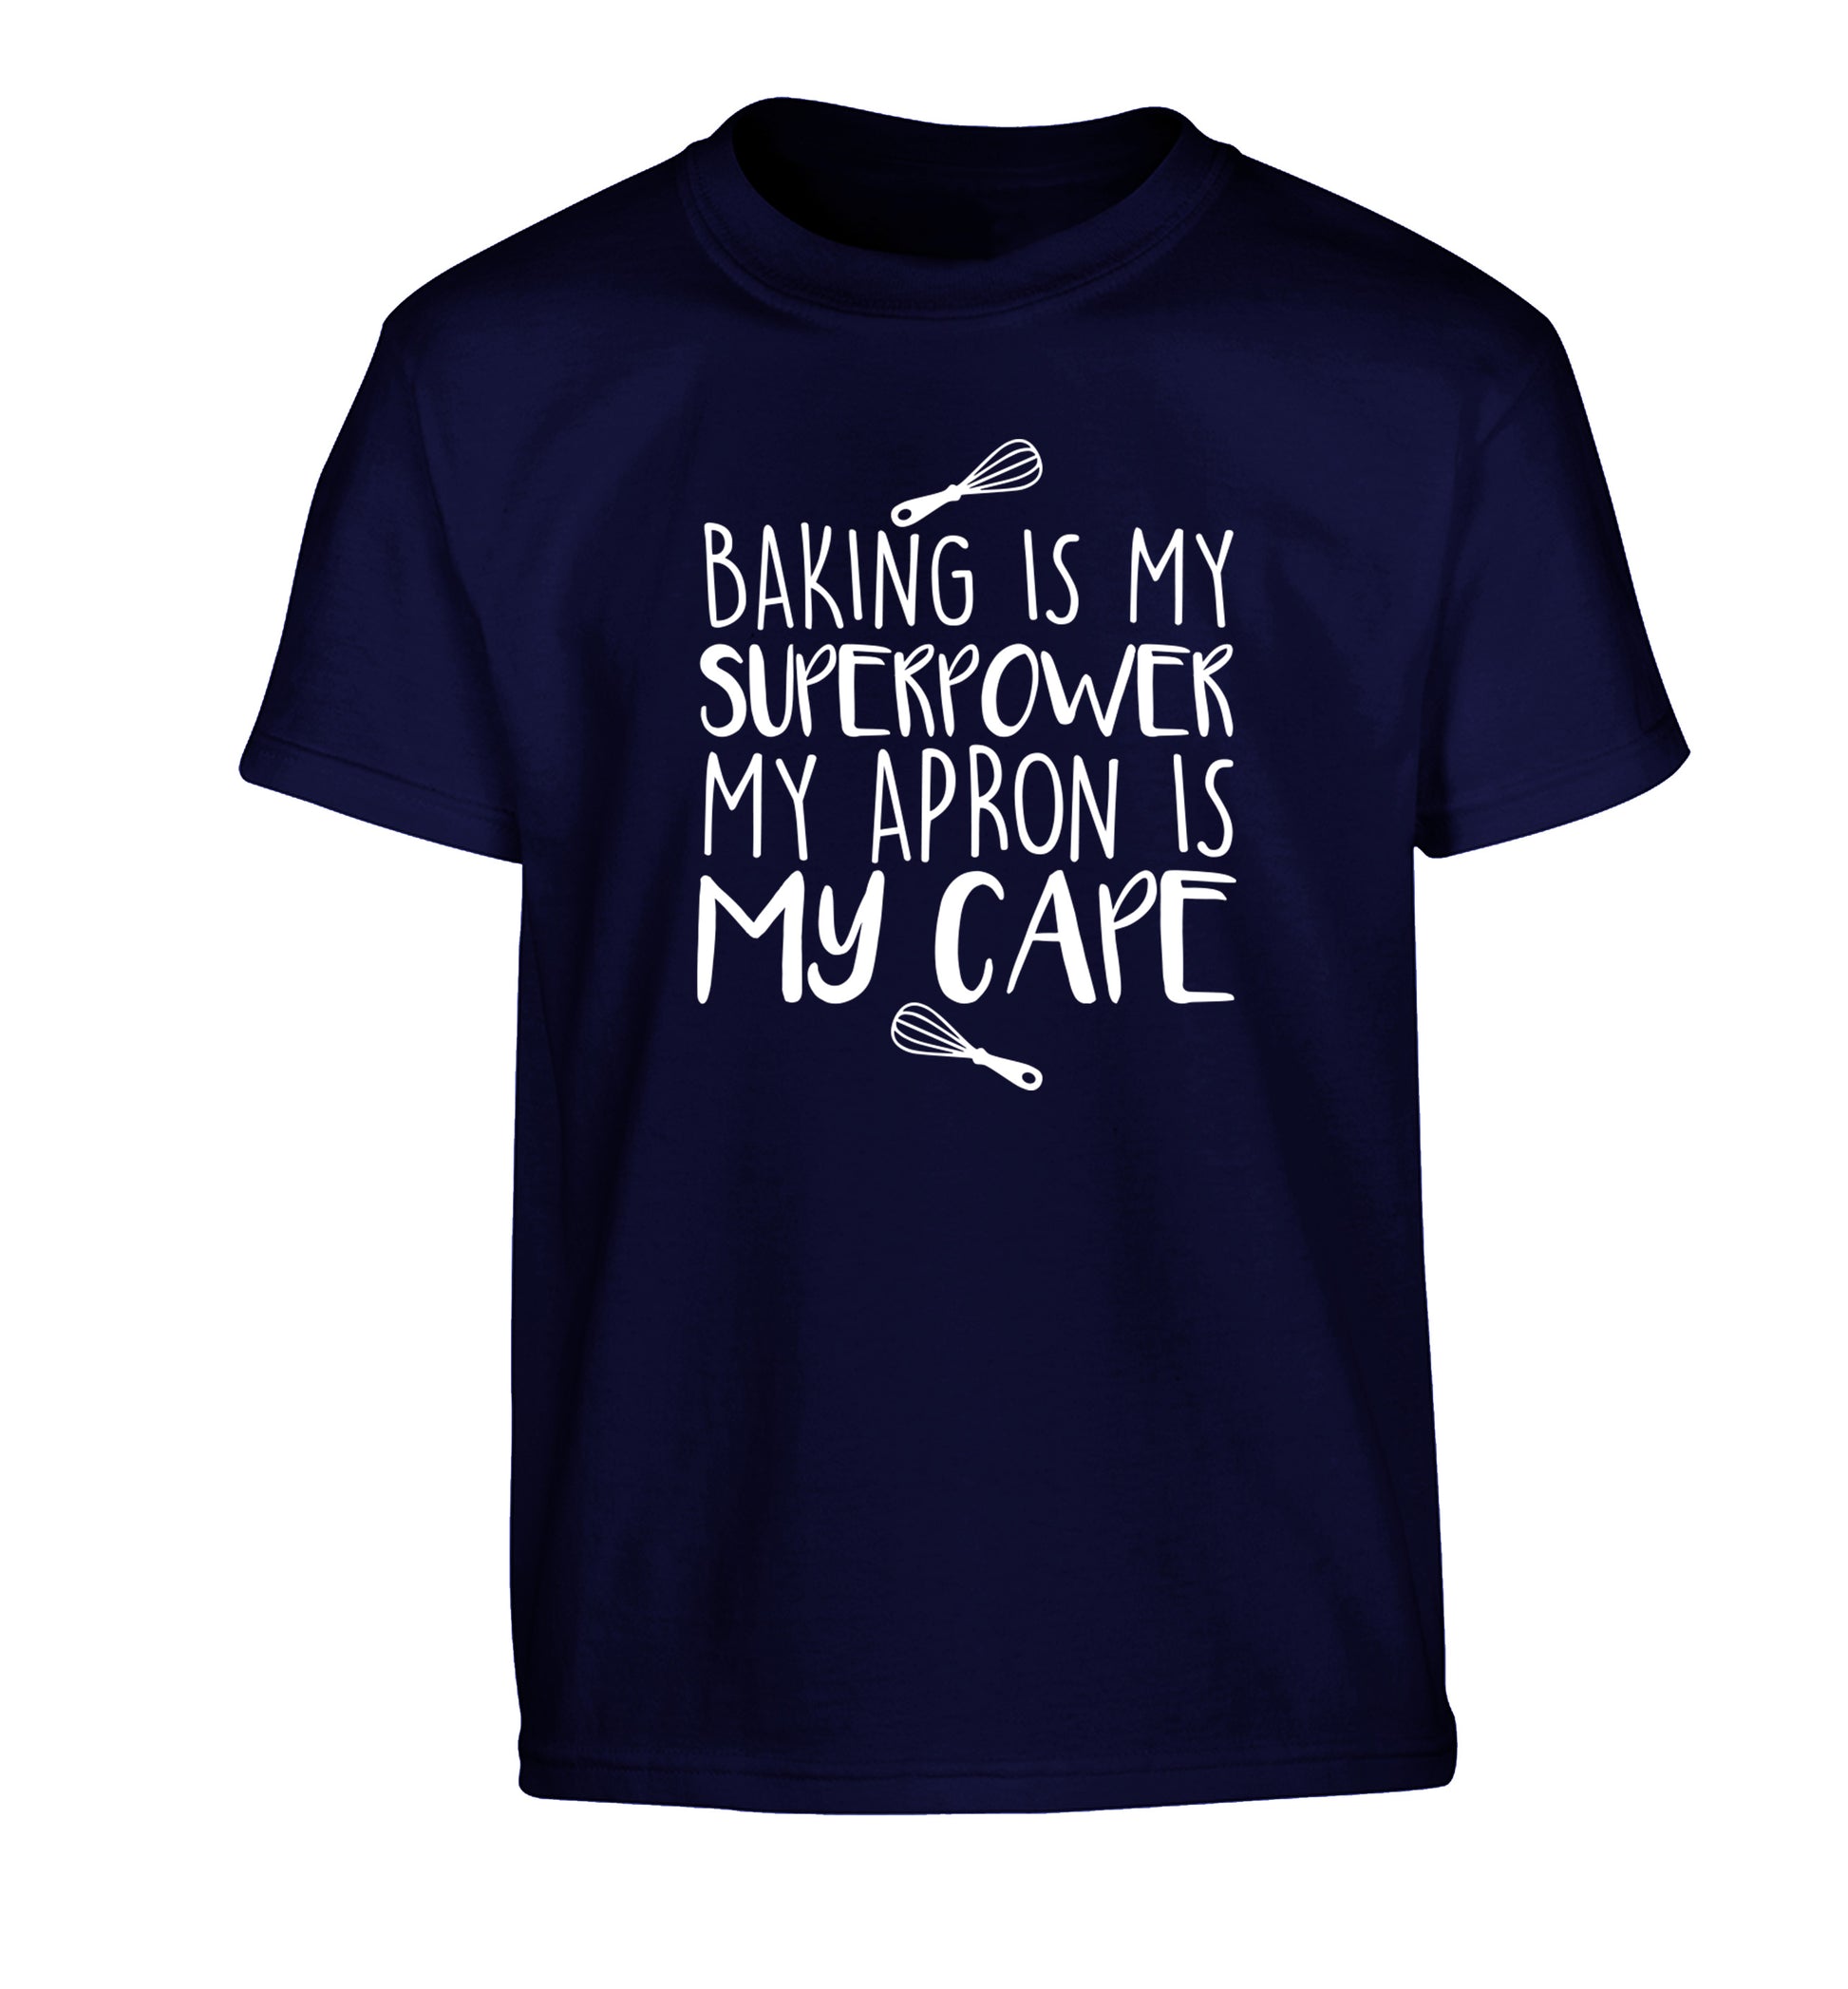 Baking is my superpower my apron is my cape Children's navy Tshirt 12-14 Years